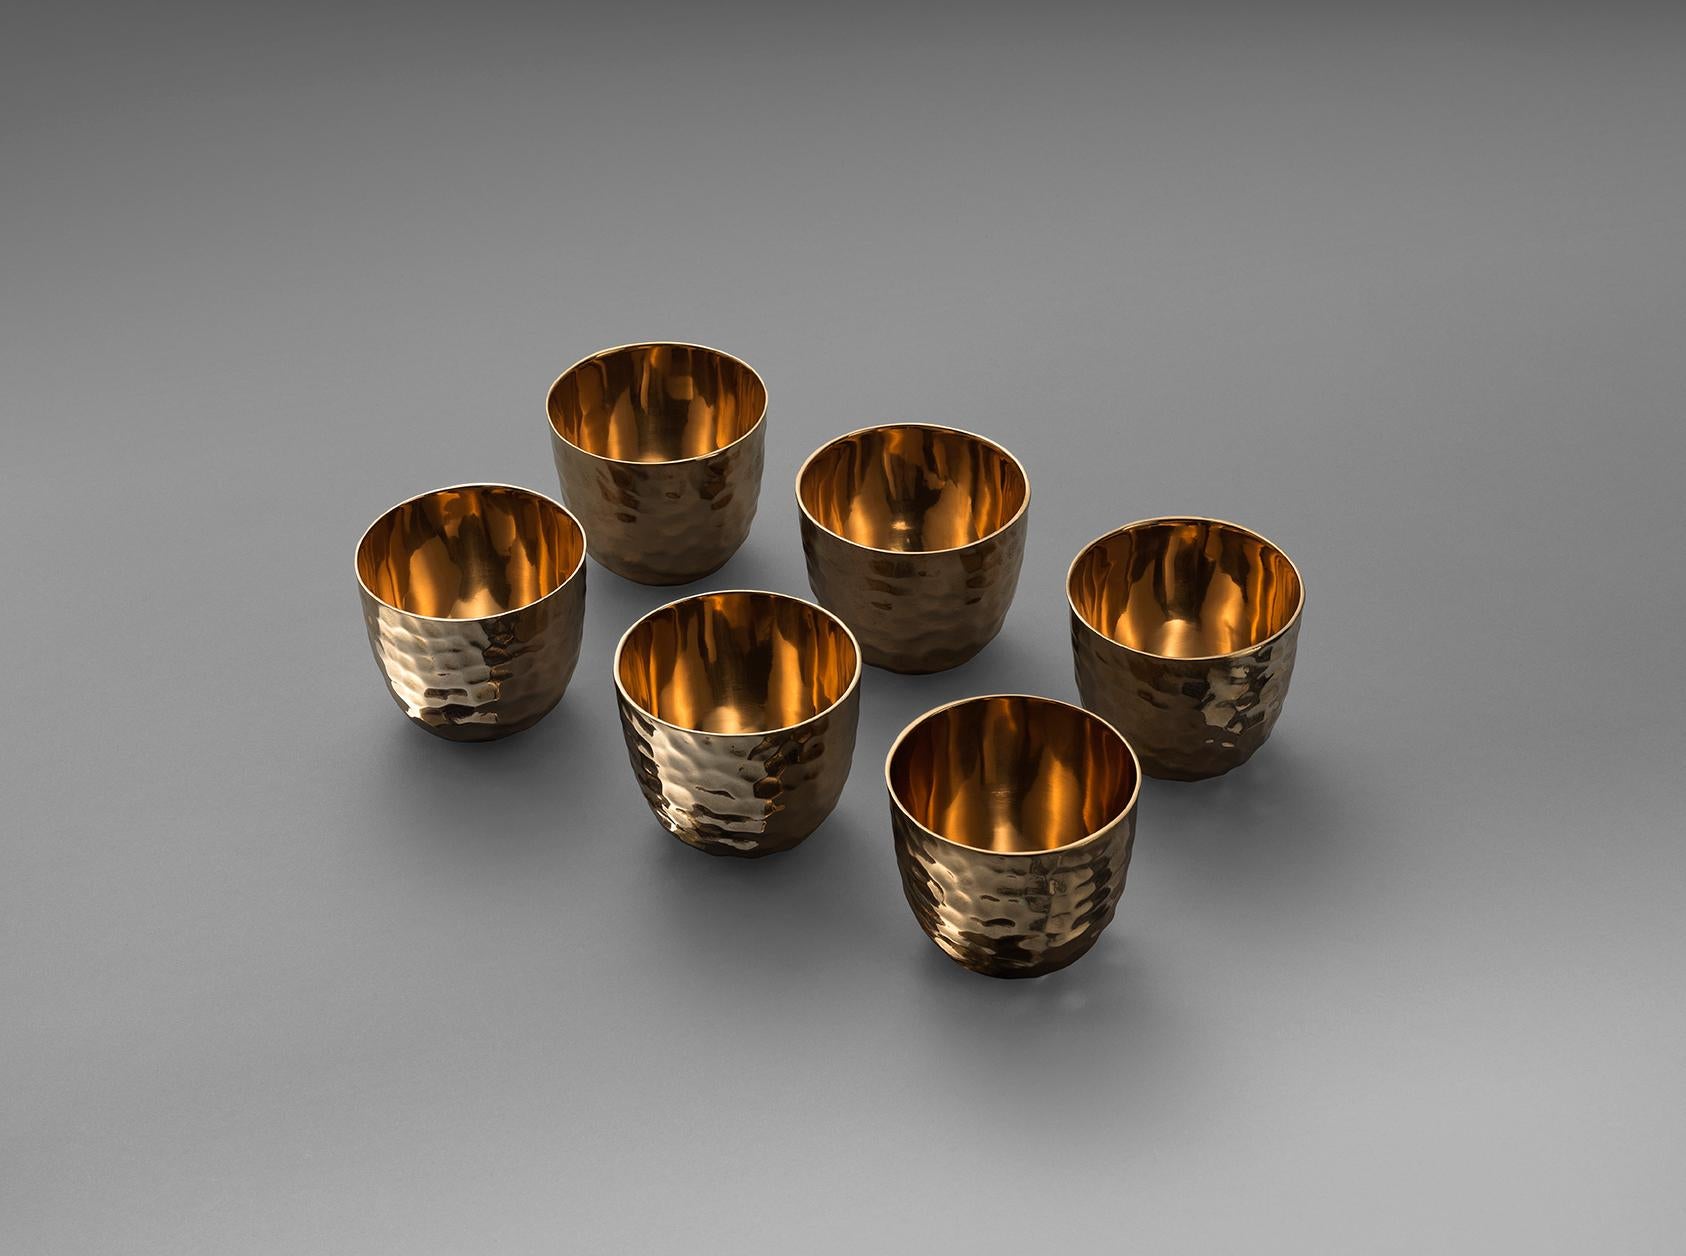 Bronze is a material as old as civilization itself and yet it has been overlooked in favour of gold and silver, porcelain and glass for tableware for many generations. 

This set of bronze cups has been cast and is highly polished. The hand-wrought